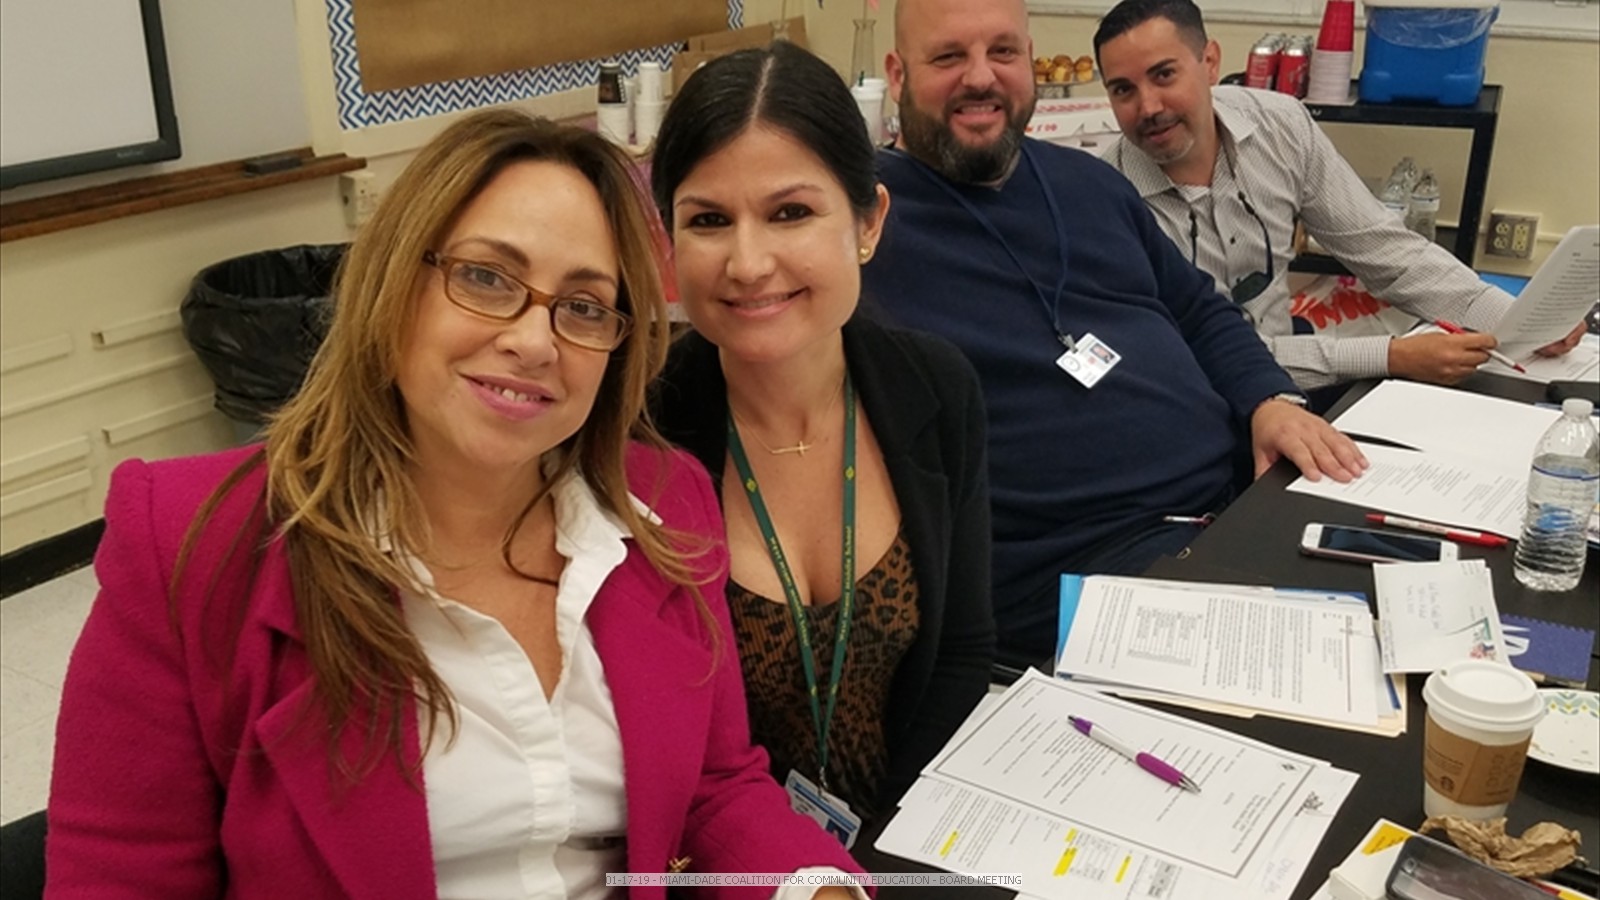 01-17-18 - MIAMI-DADE COALITION FOR COMMUNITY EDUCATION - BOARD MEETING (28)